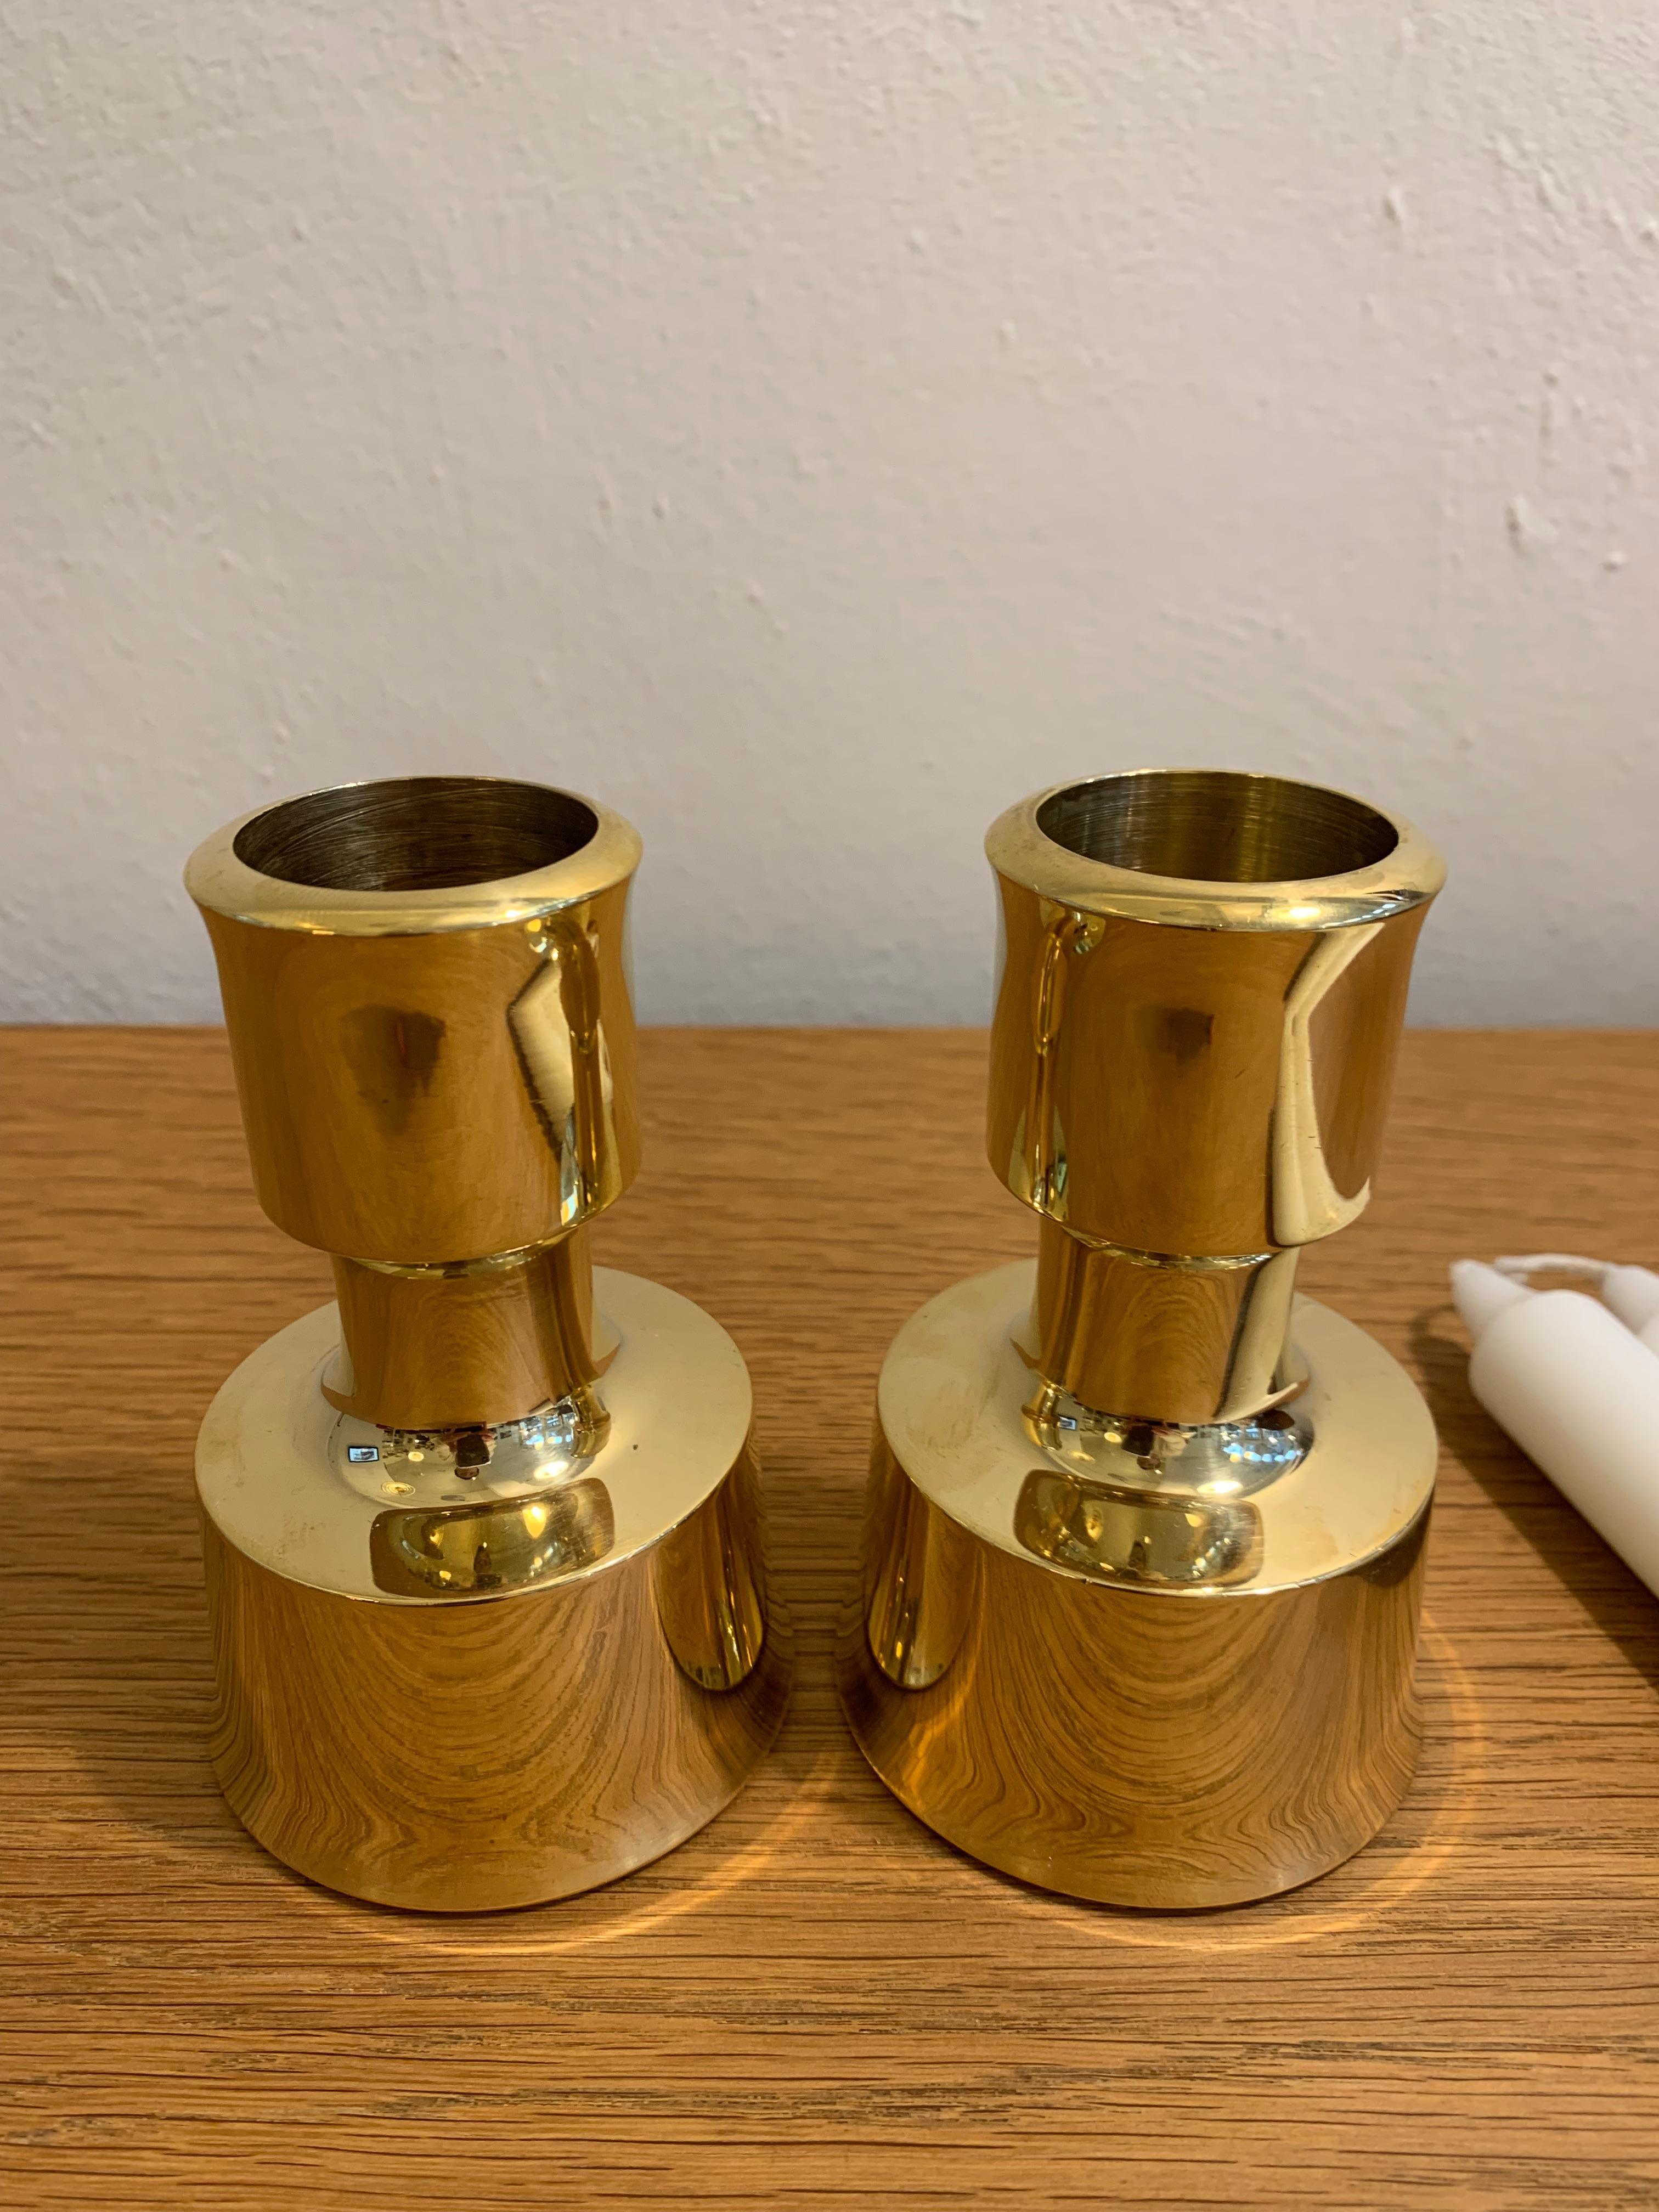 Finnish Pair of Solid Brass Candle Holders by Jens H. Quistgaard for Dansk Designs 1963